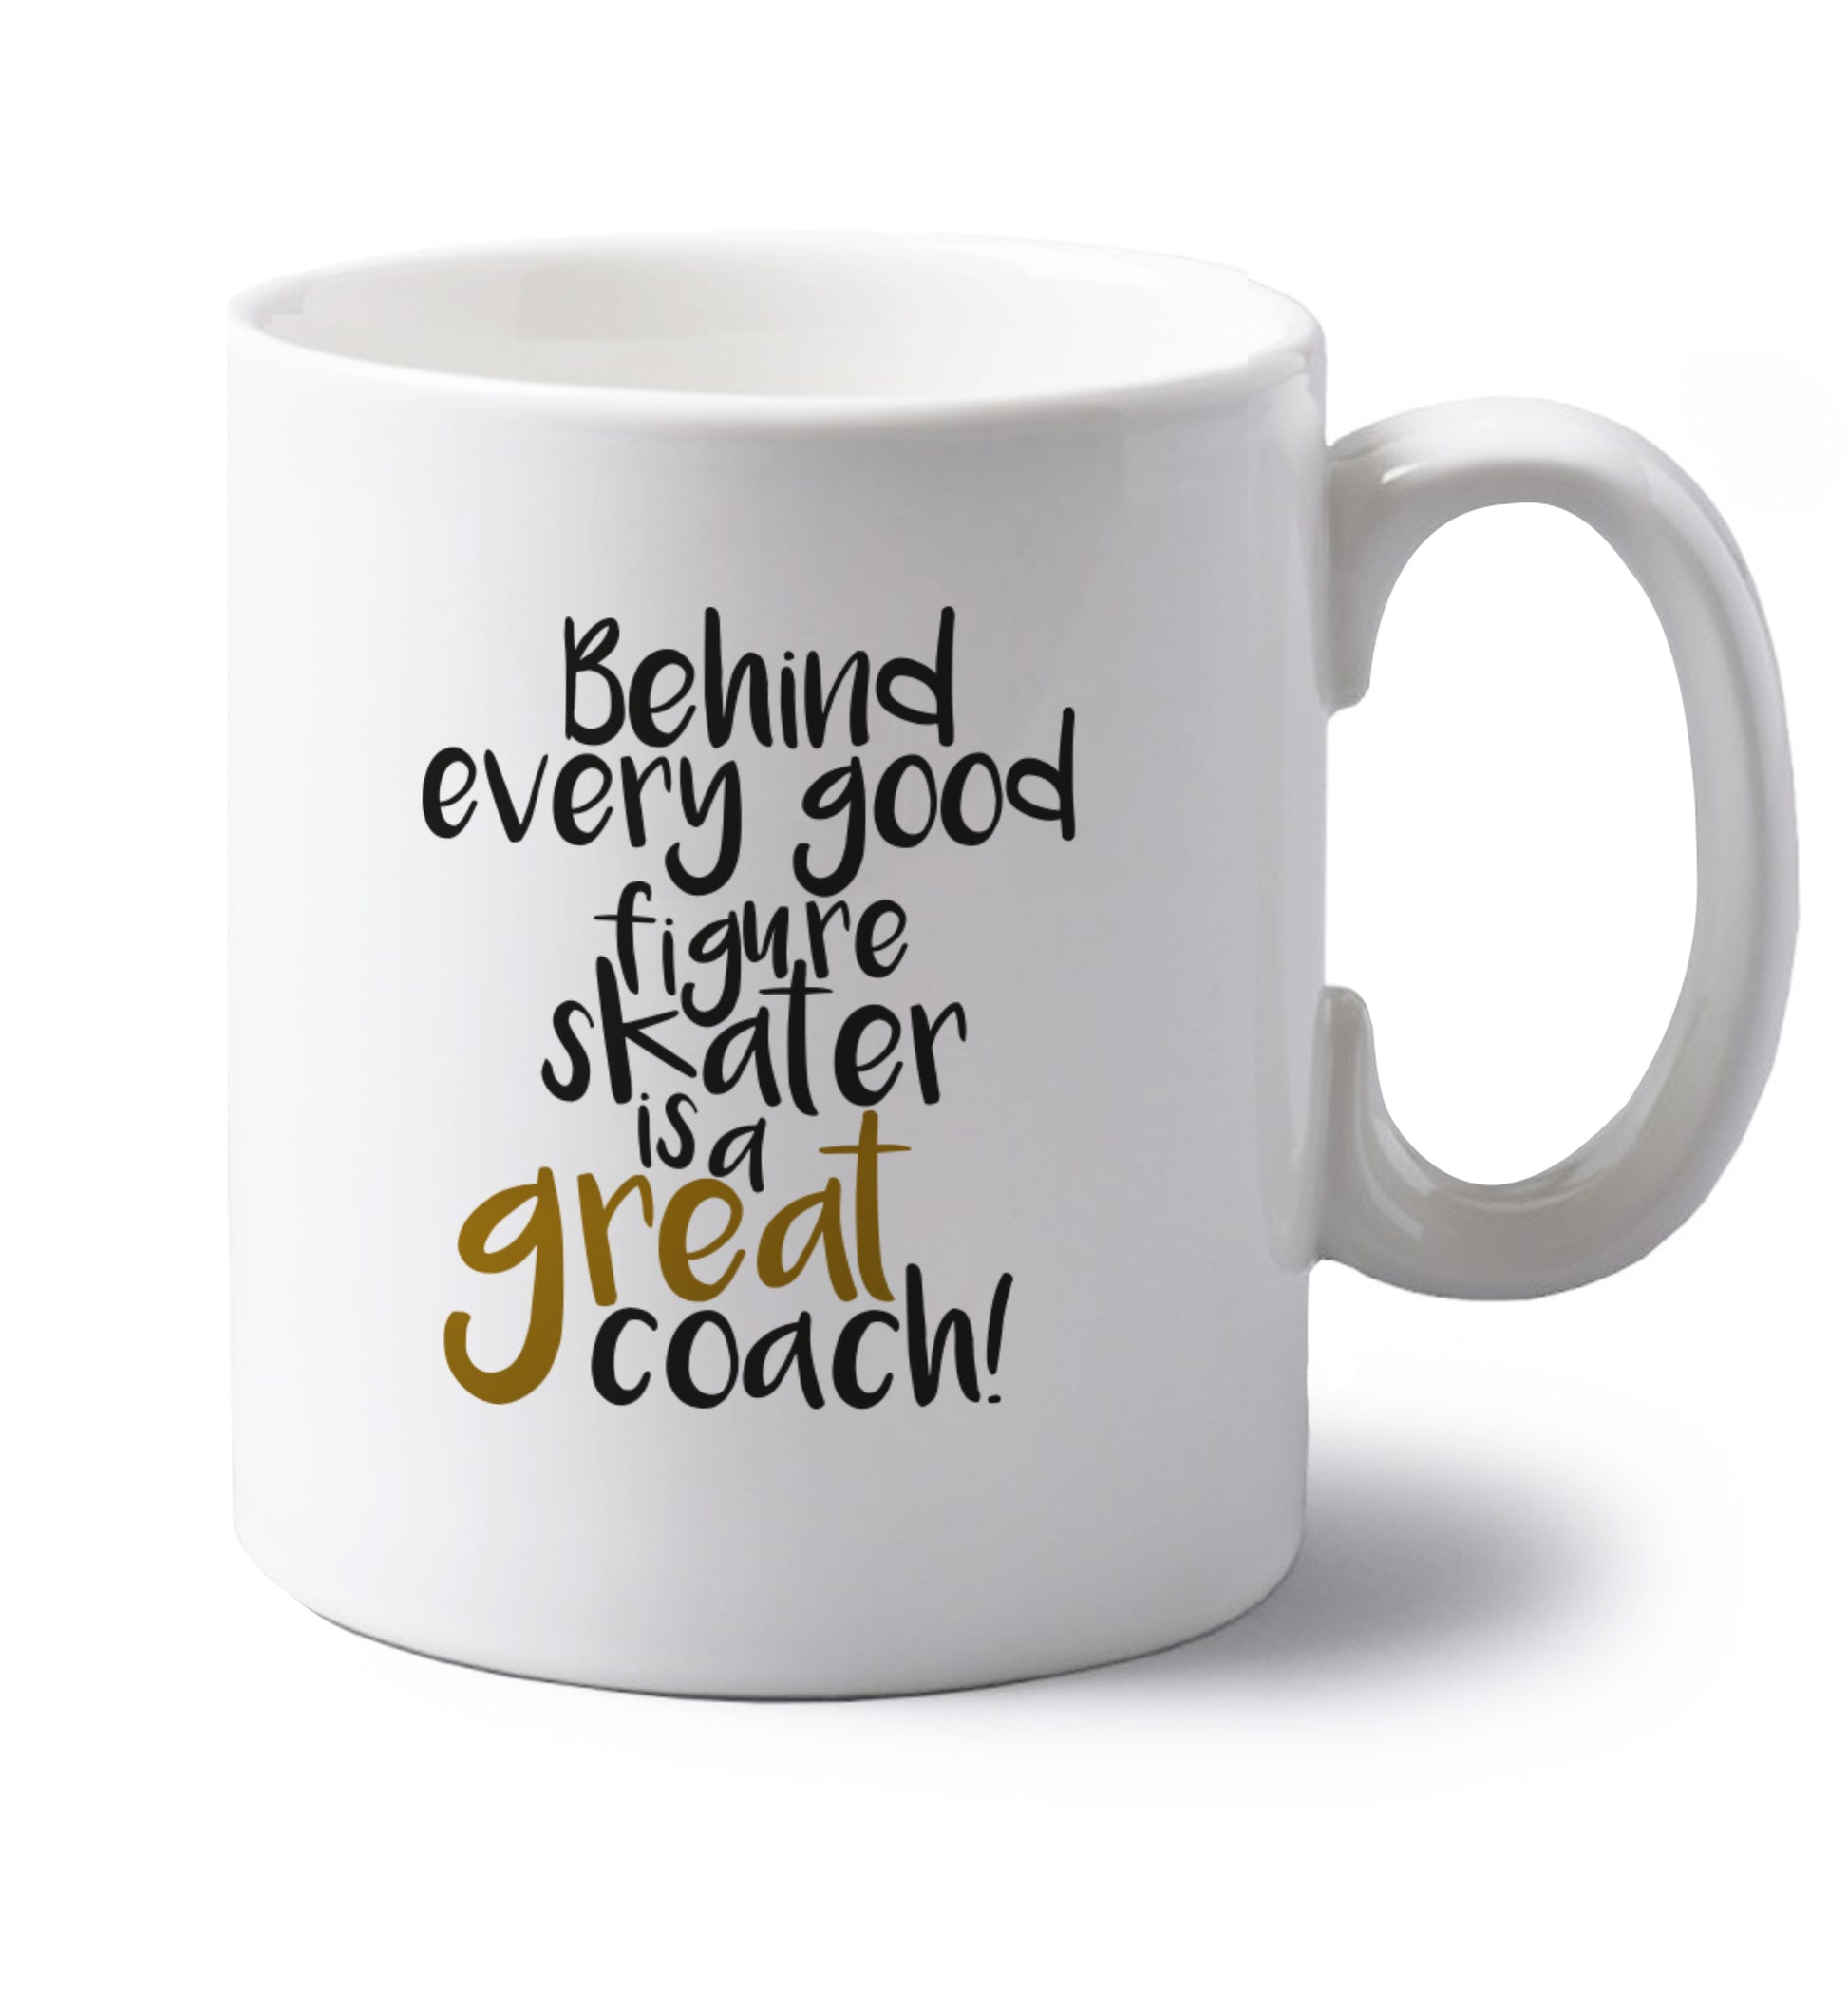 Behind every good figure skater is a great coach left handed white ceramic mug 